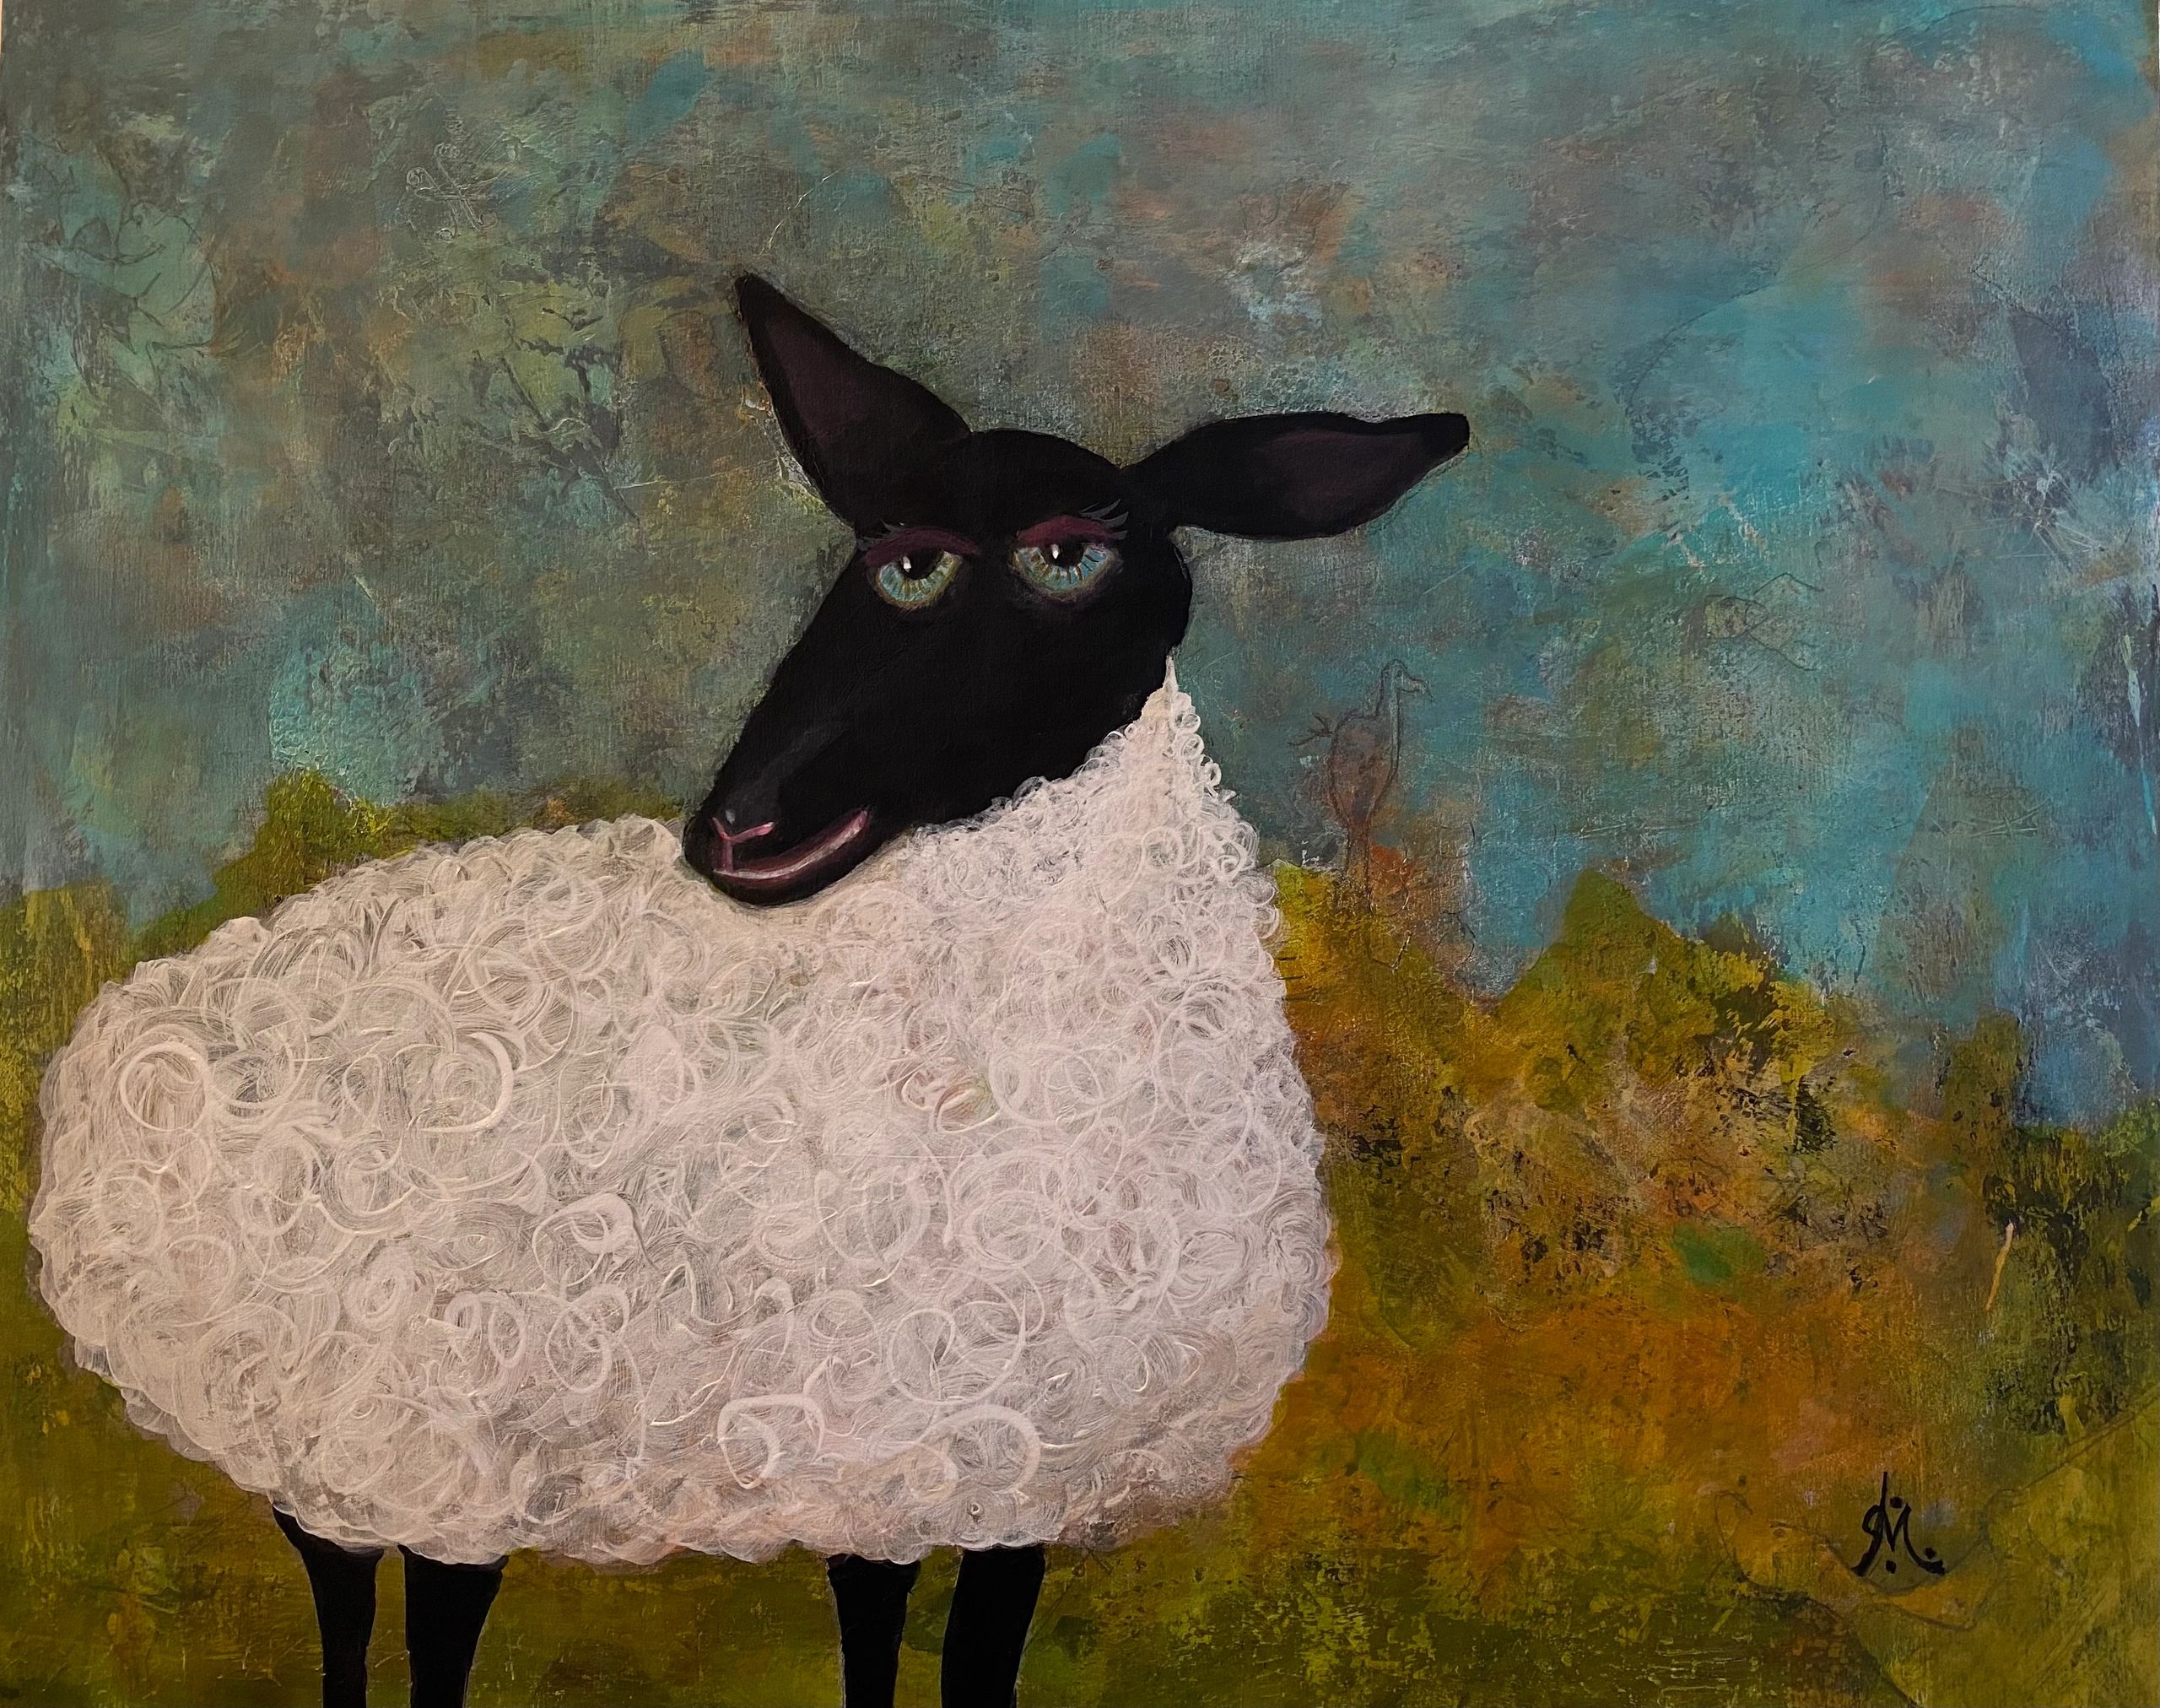 Three Bags Full, whimsical abstract of a black faced sheep, Deana Markus, fun, playful, acrylics pai